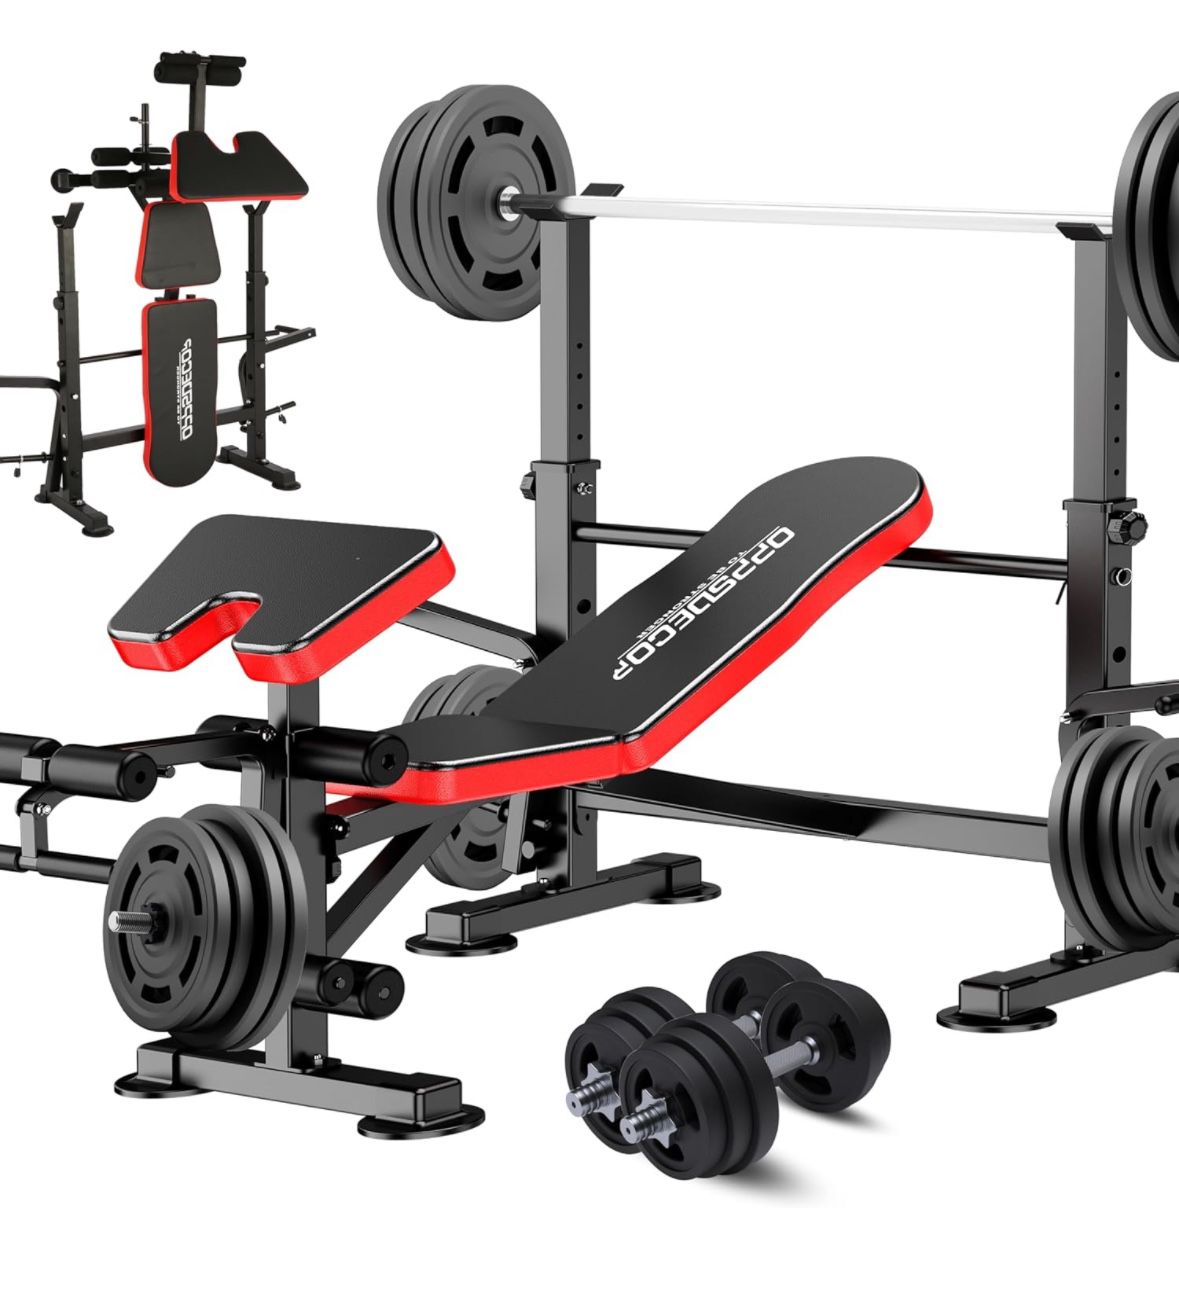 600lbs 6 in 1 Weight Bench Set with Squat Rack Adjustable Workout Bench with Leg Developer Preacher Curl Rack Fitness Strength Training for Home Gym